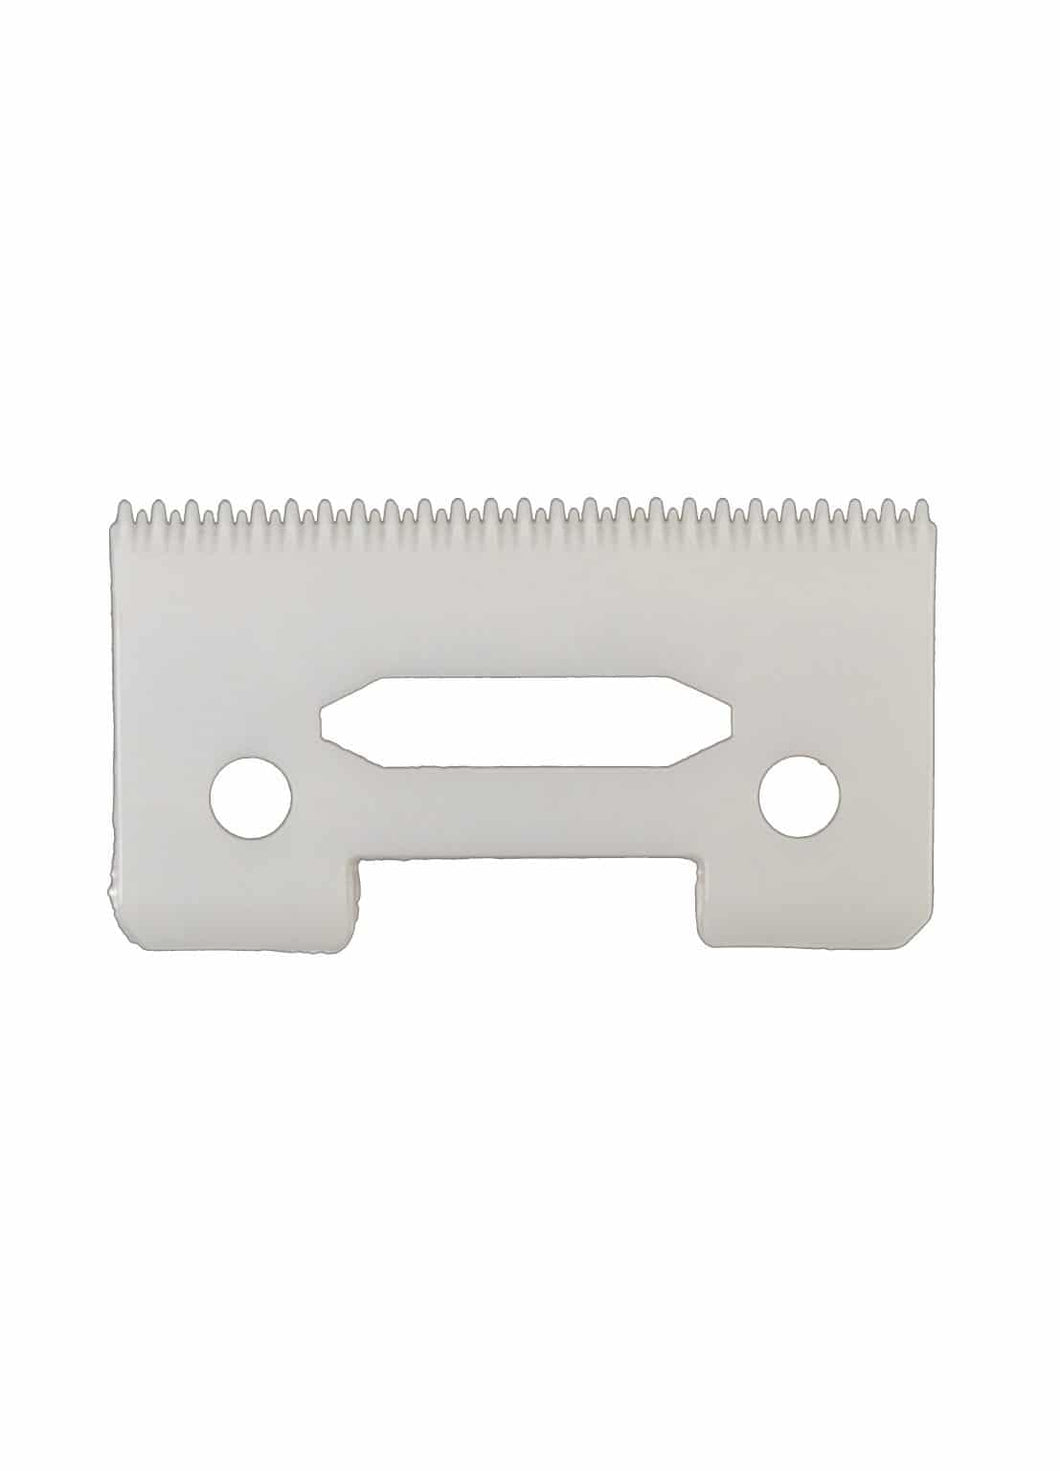 Ceramic Staggertooth Cutting Blade - Wahl Clippers / Magic Clip